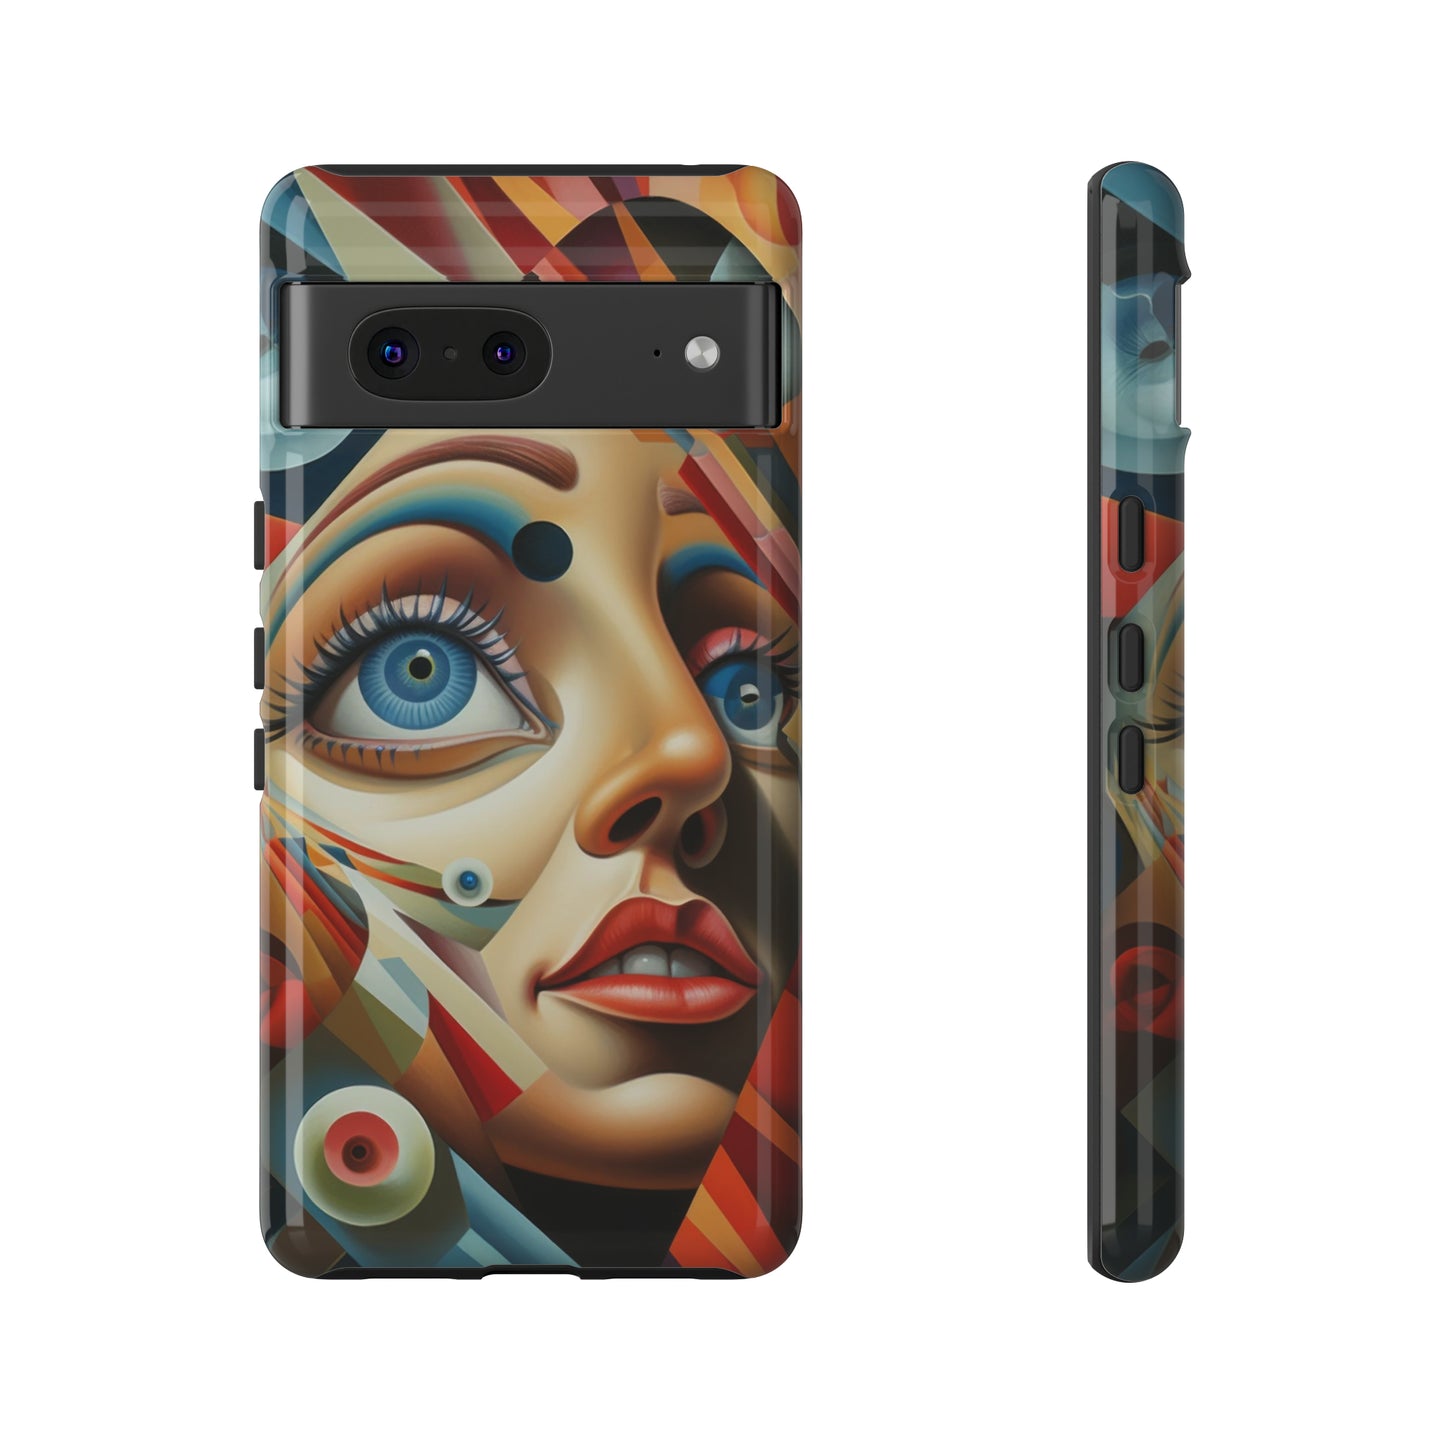 Surreal Shattering Reality Phone Case - Colorful Chaos Around a Woman's Face for iPhone, Samsung, Pixel